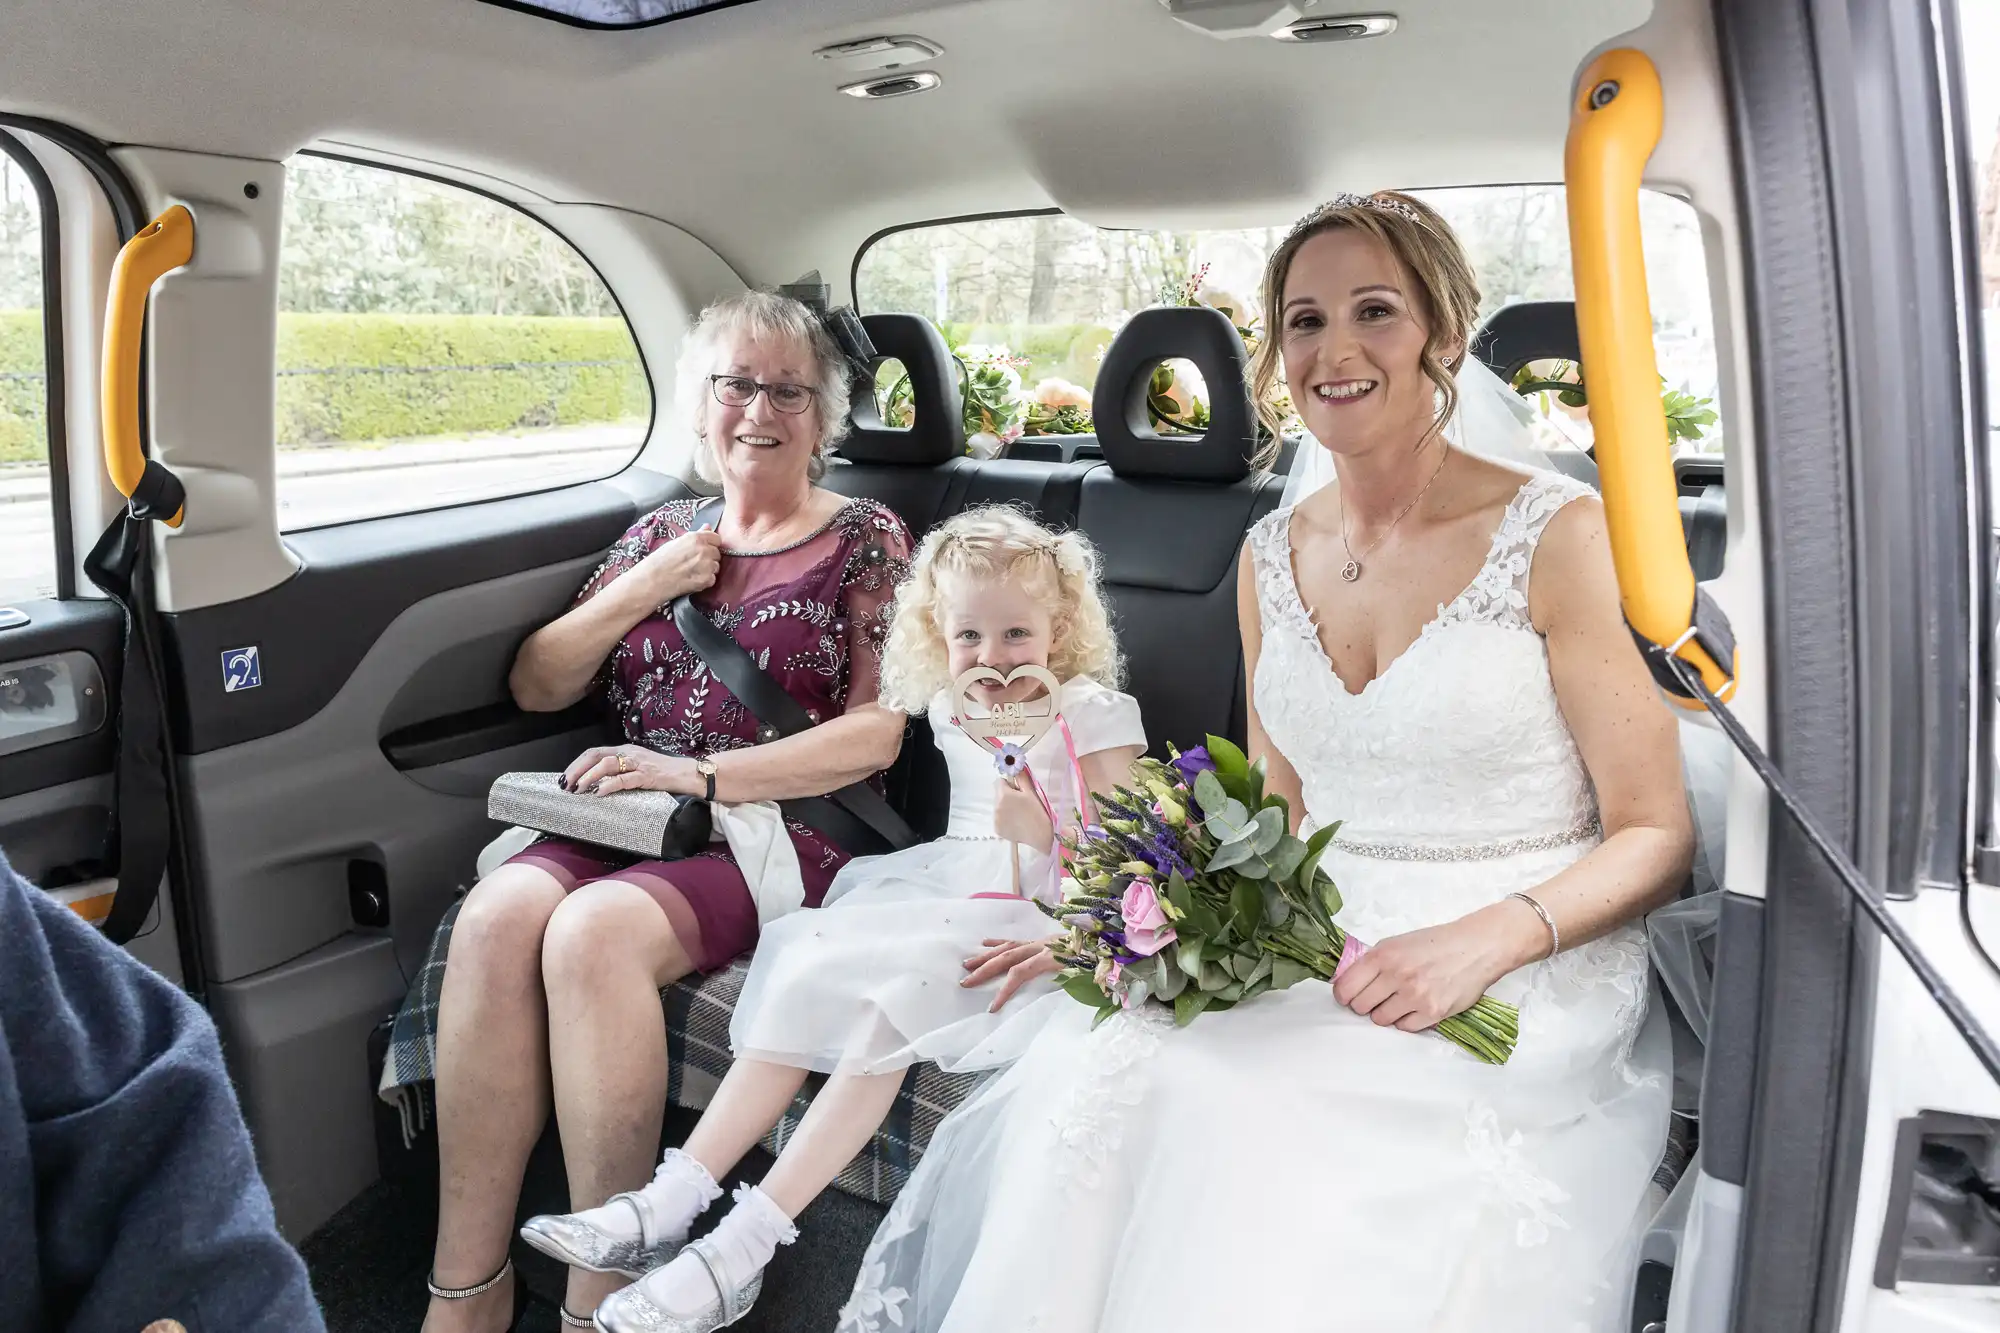 A bride, a young girl, and an elderly woman sit inside a vehicle. The bride holds a bouquet, the young girl wears a white dress and holds a heart-shaped wand, while the elderly woman smiles.